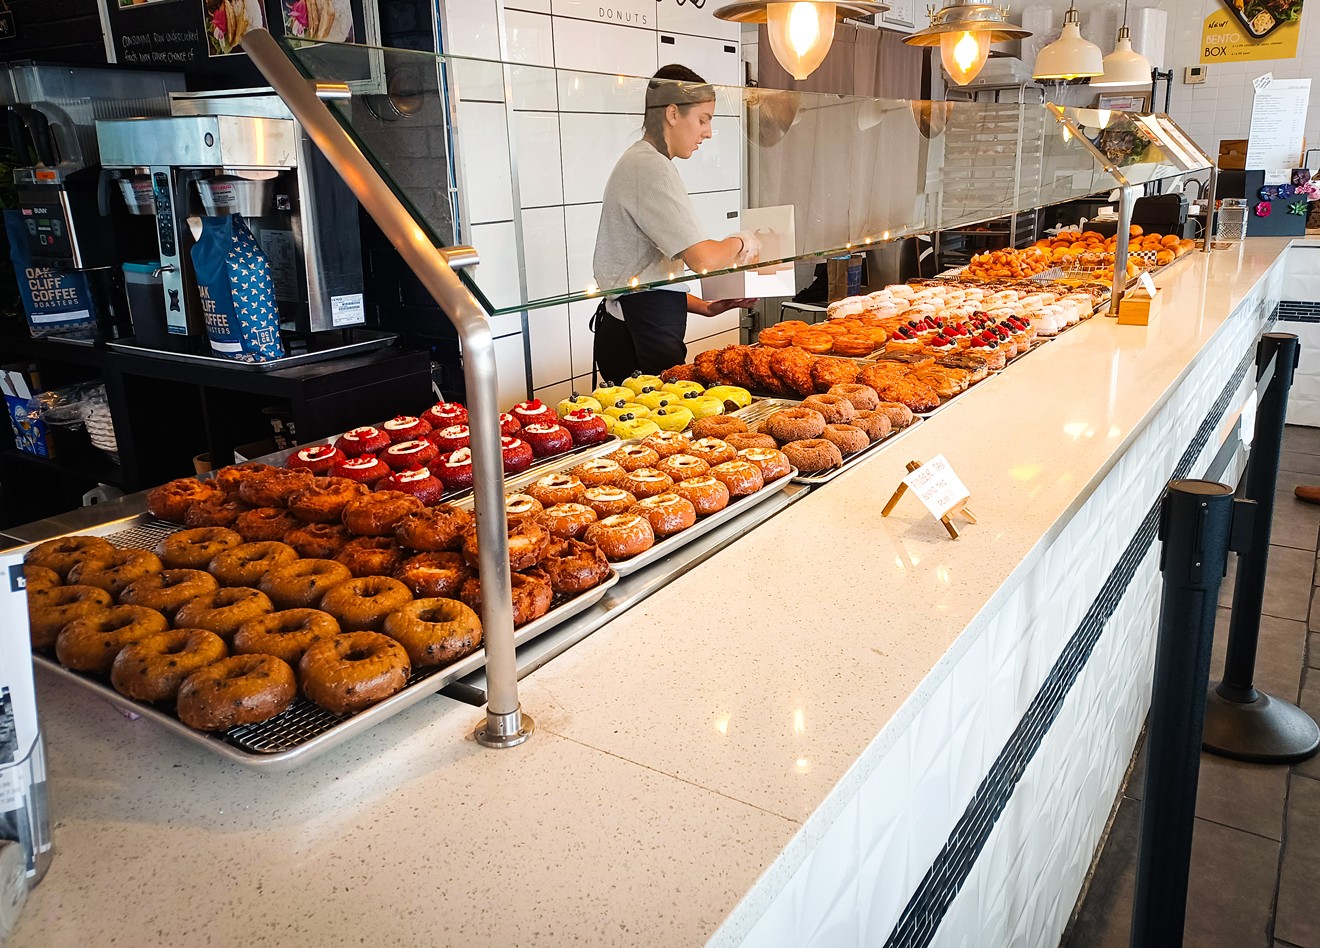 Twinkle Donuts is another in the growing list of amazing doughnut pushers in North Texas.